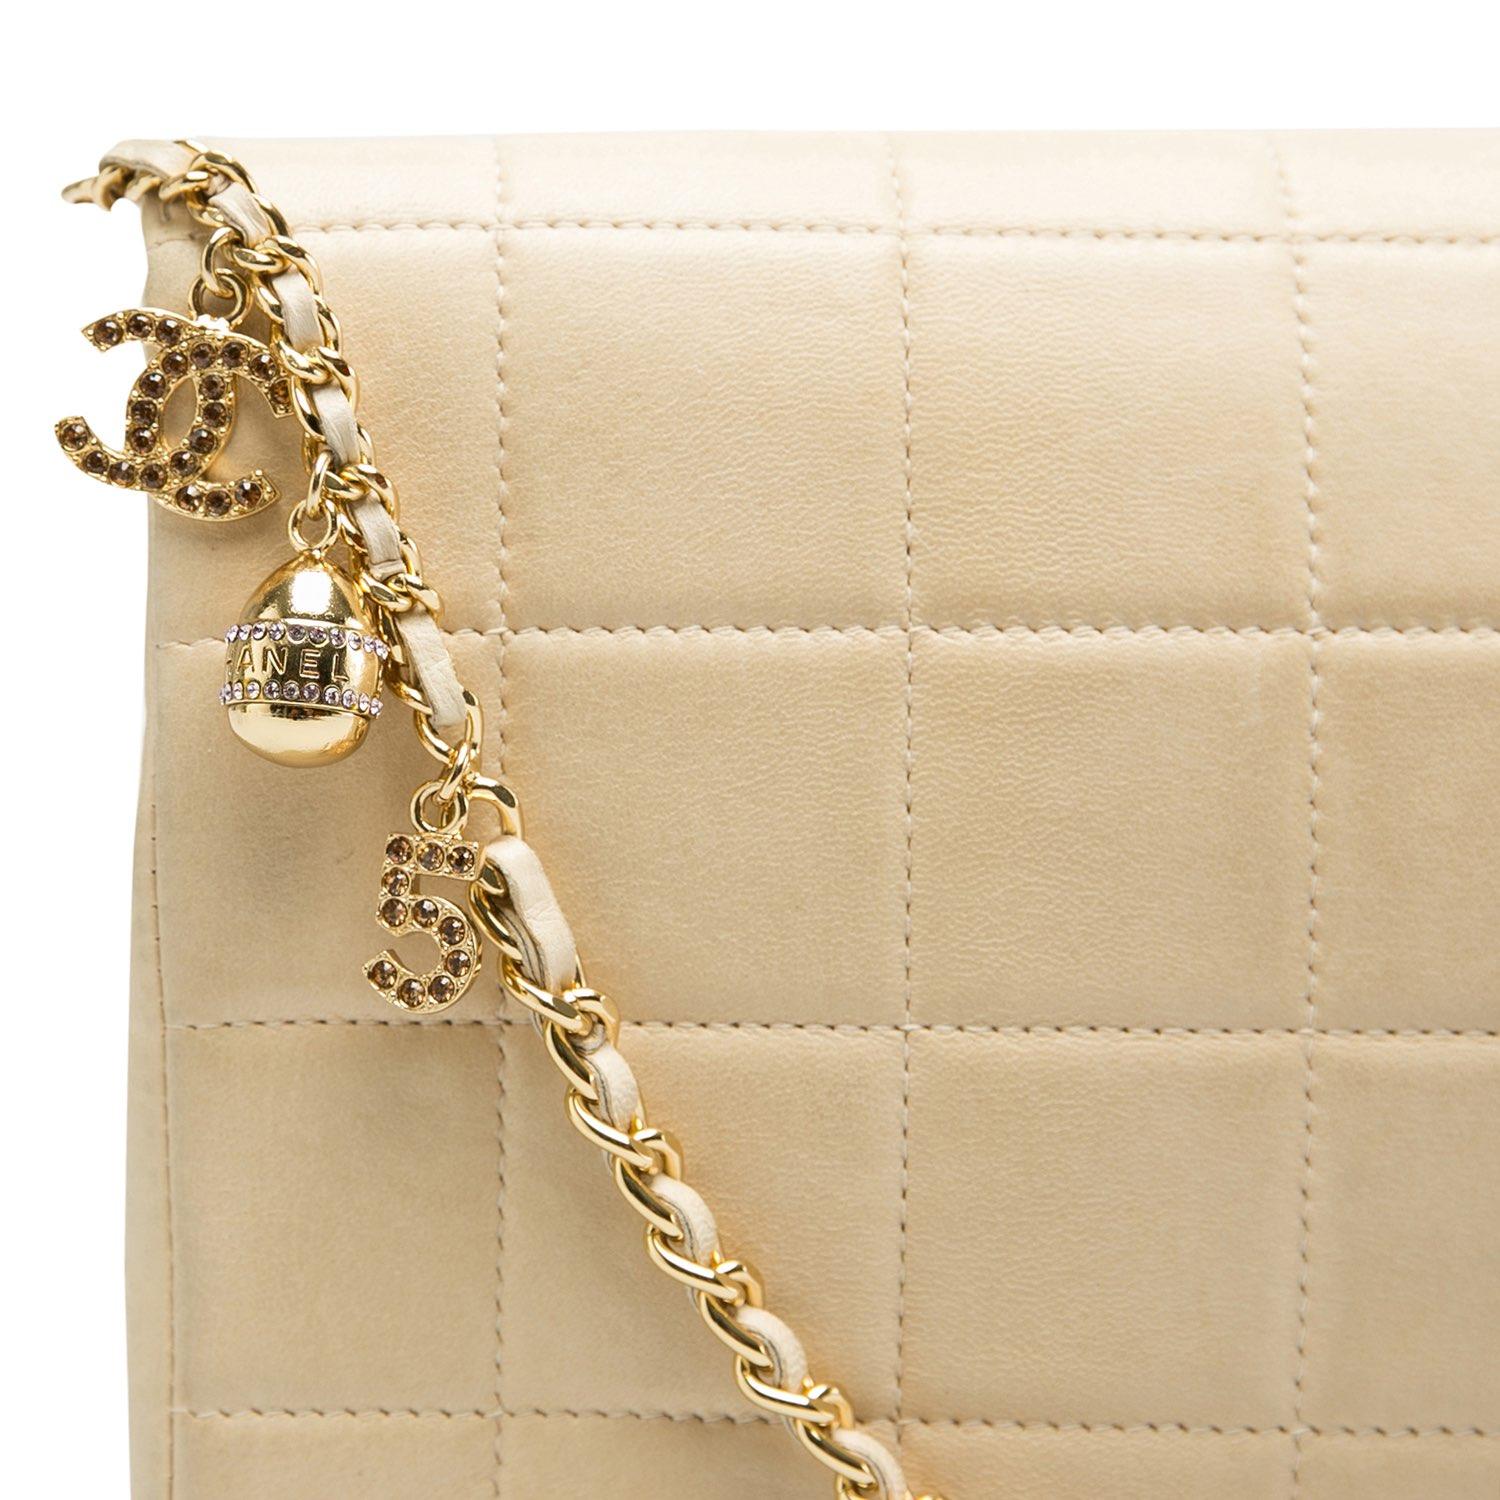 Chanel Beige Chocolate Bar Leather Lucky Charms Chain Bag 3